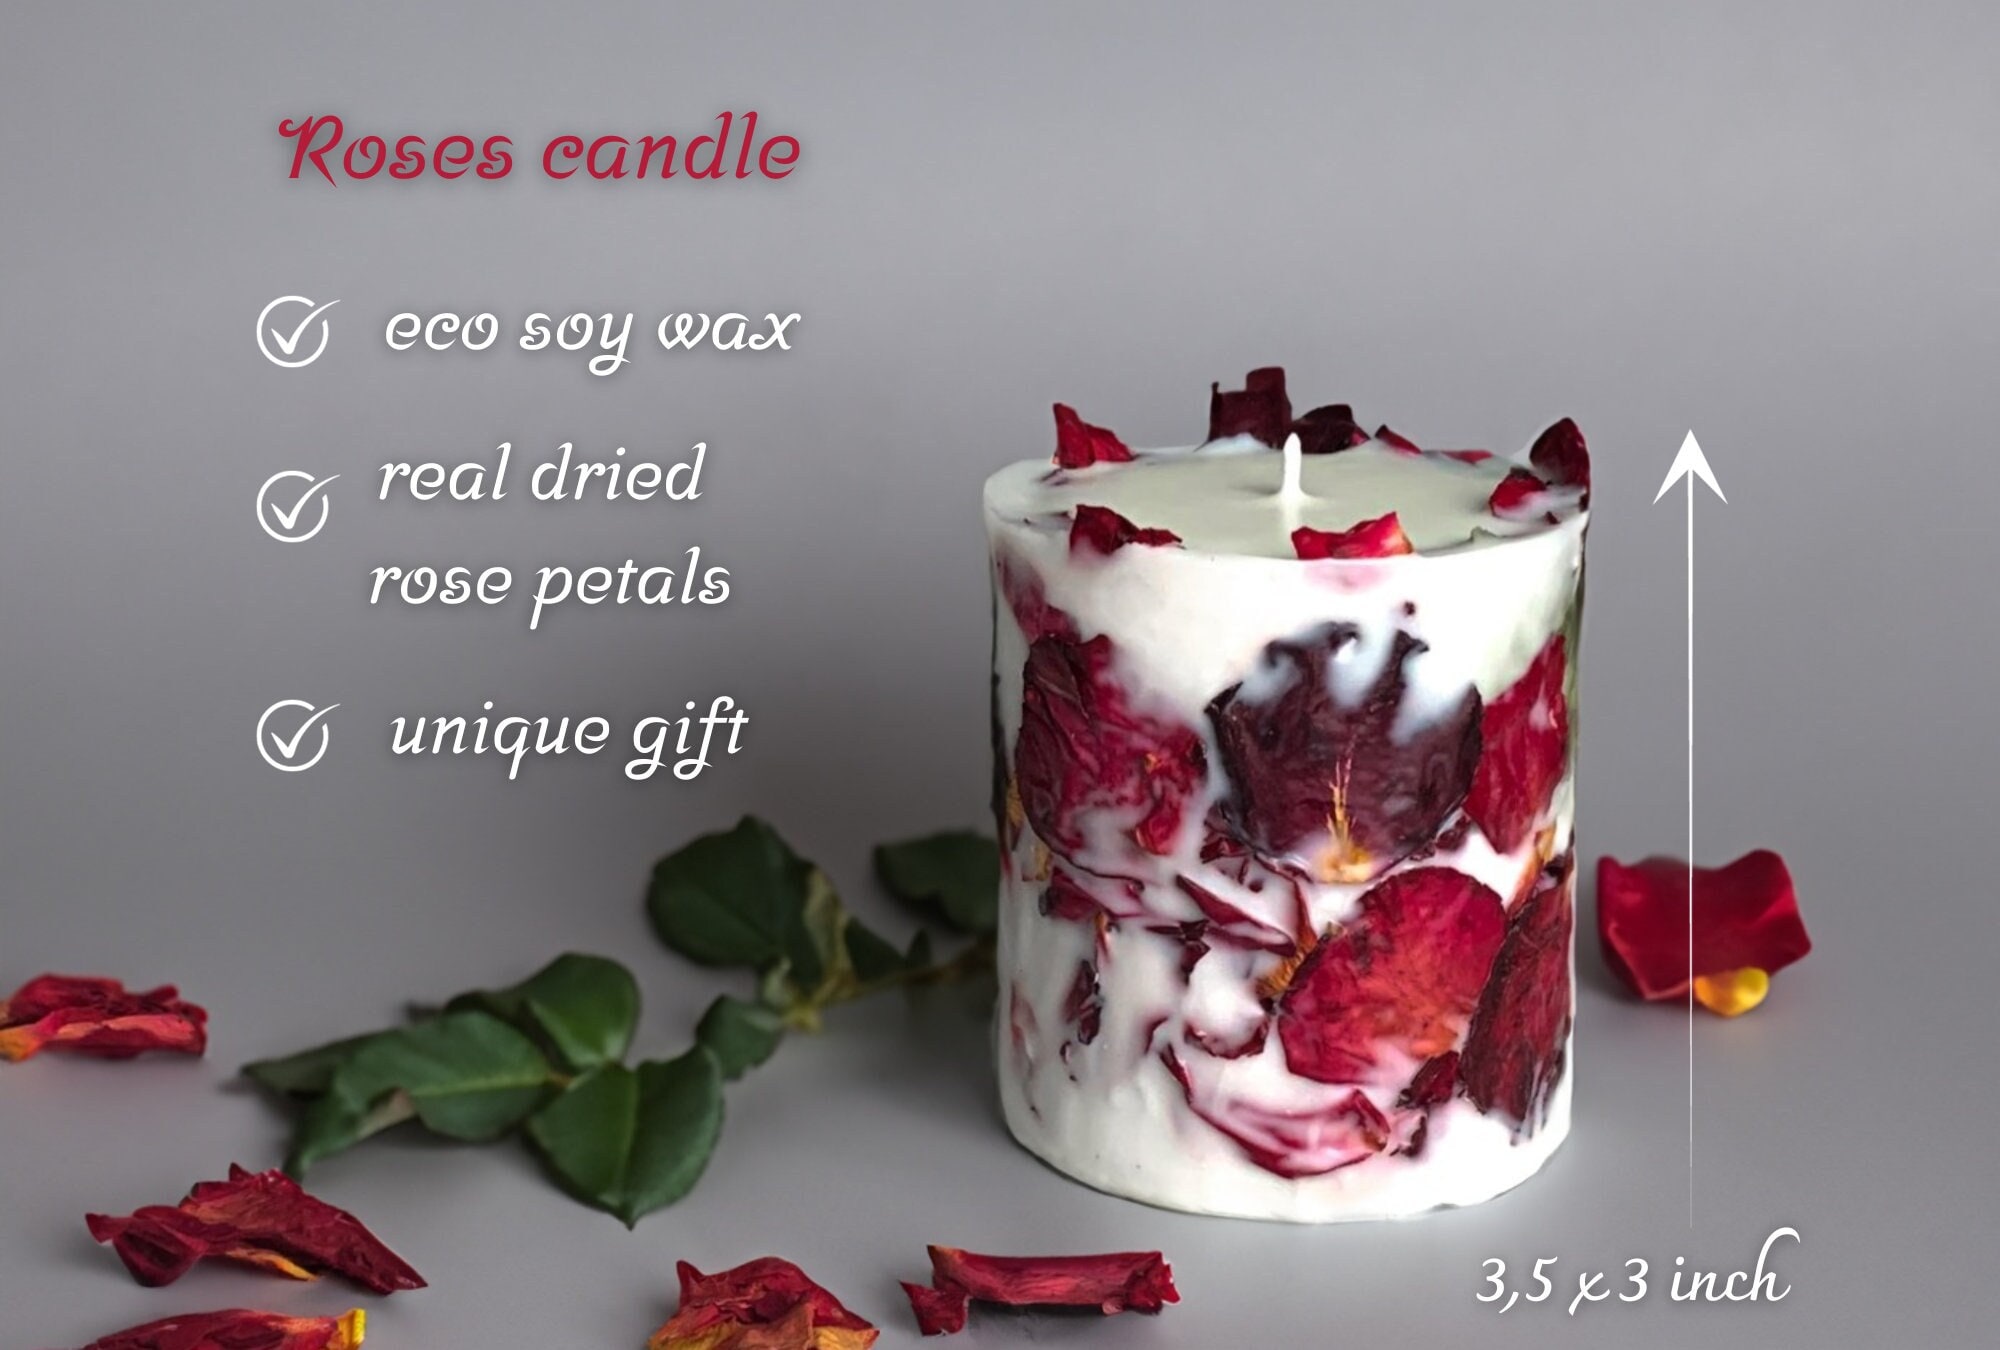 Mixed Dried flowers for Candle decorating - Rose Buds, Rose Petals,  Eucalyptus and more 12gm bag - Refill my Candles